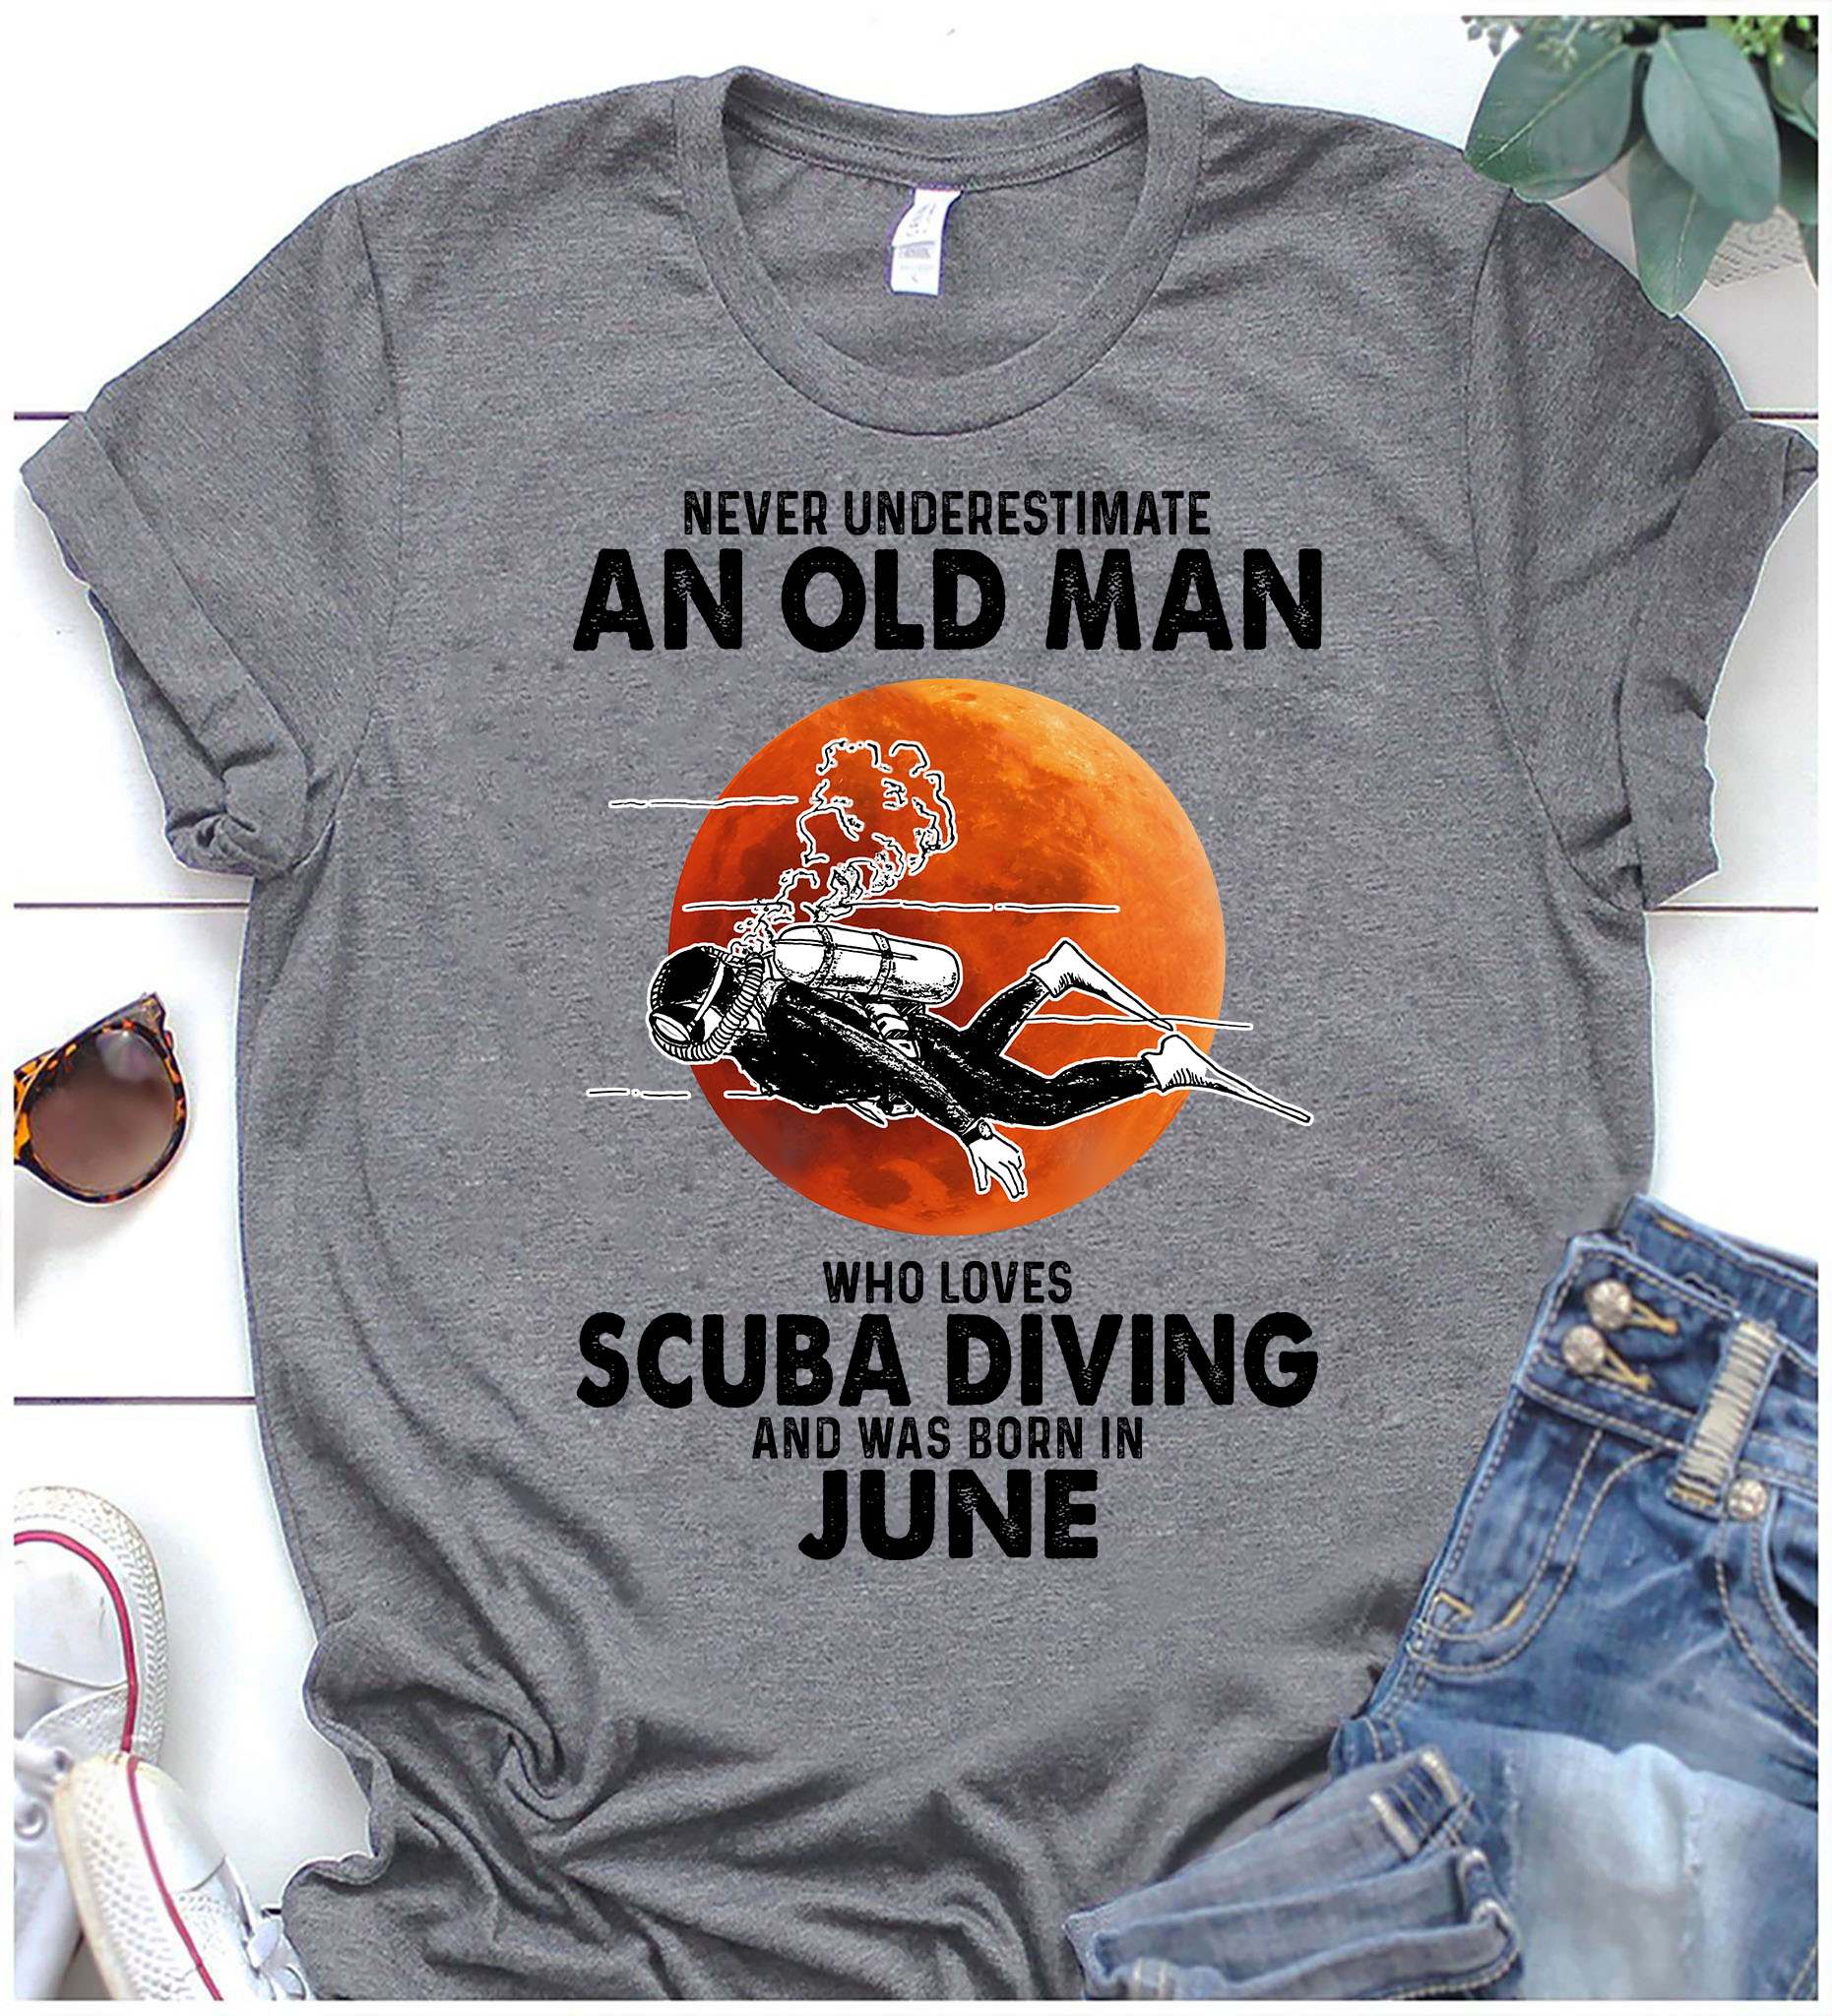 Scuba Diving, June Birthday Man - Never underestimate an old man who loves skiing and was born in june